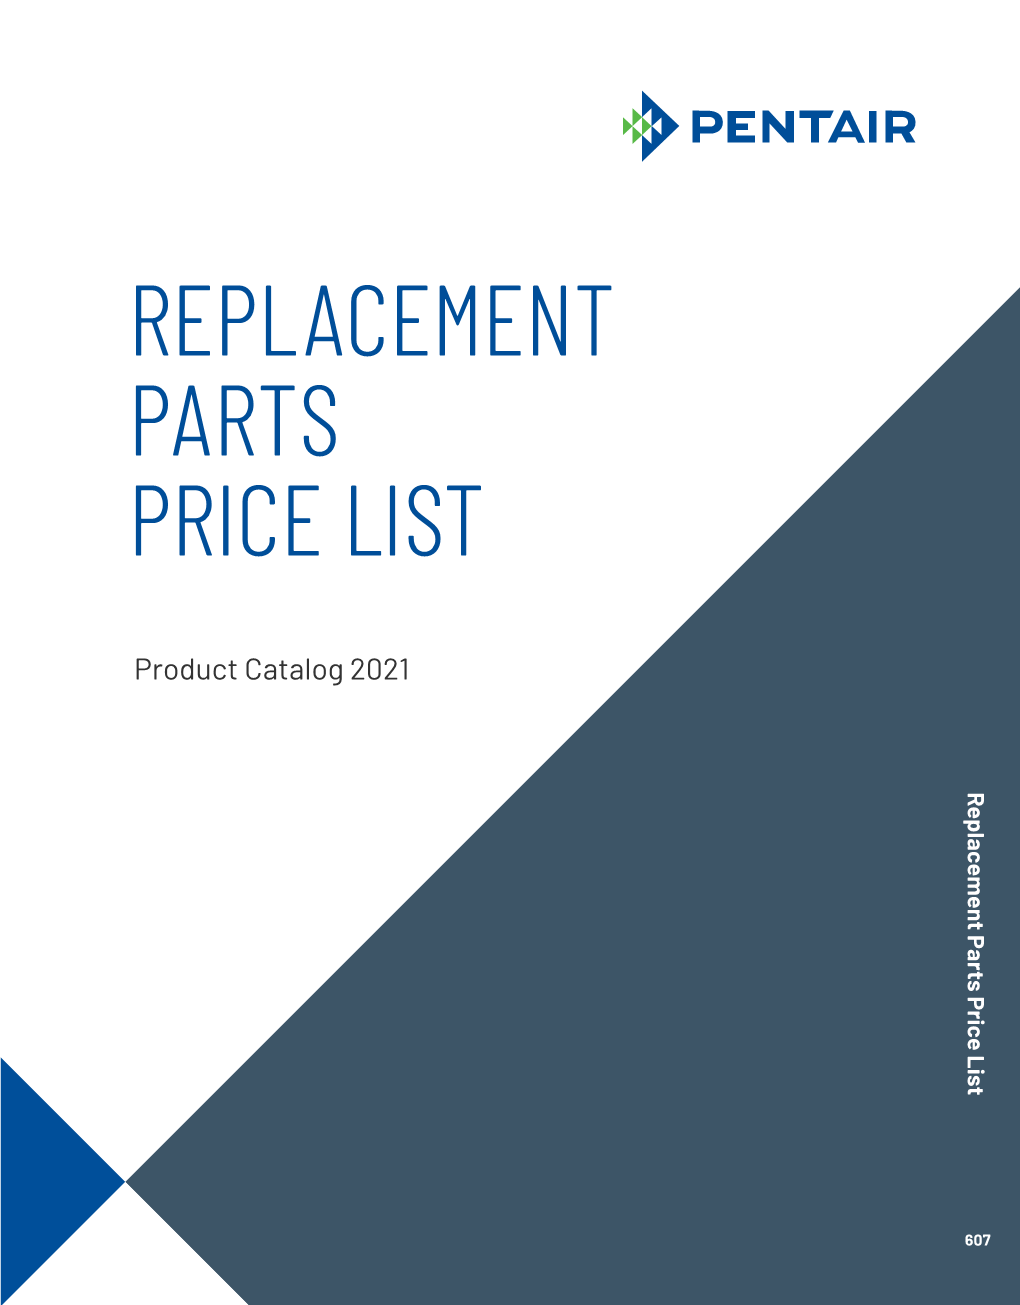 Replacement Parts Price List